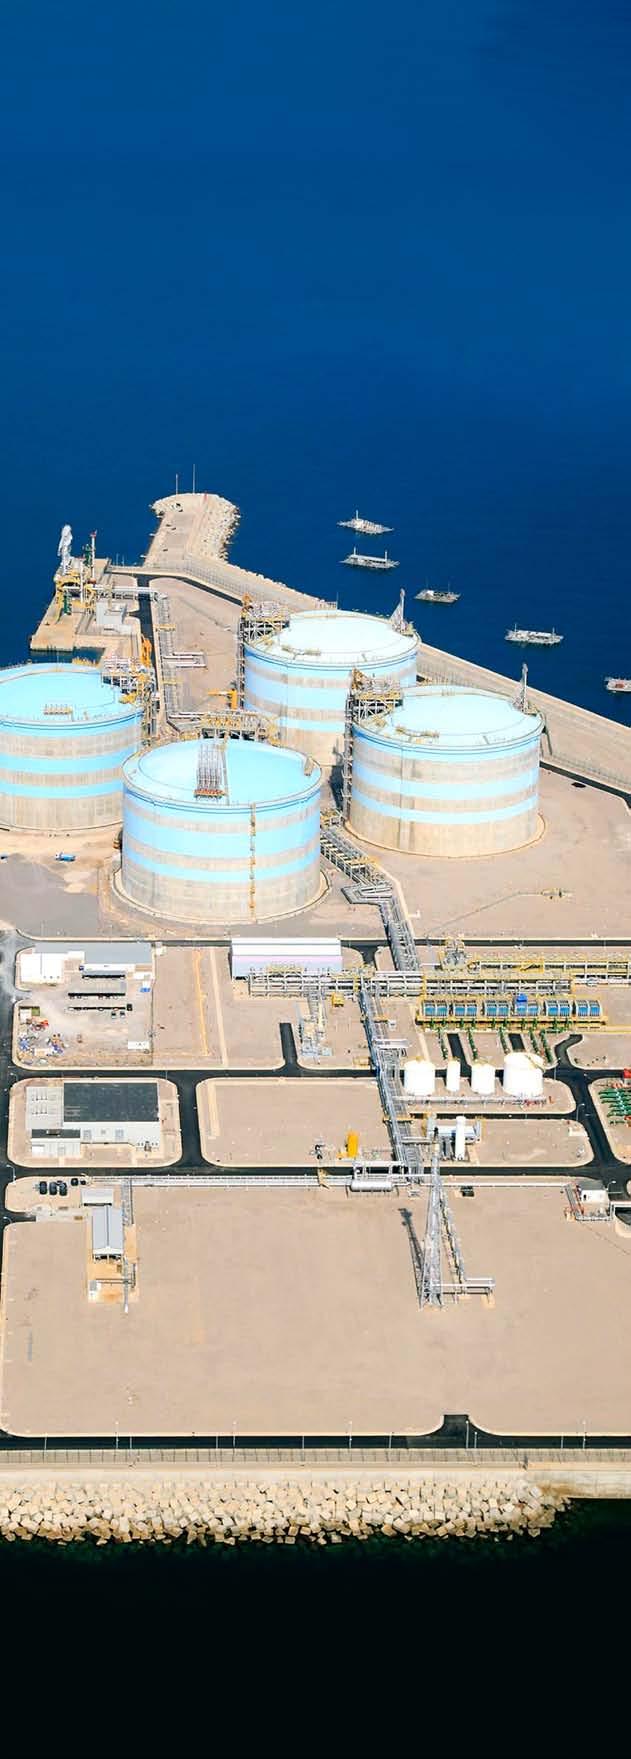 1 MILESTONES STRABAG/DYWIDAG LNG Technology has been involved in the development of LNG storage systems right from the beginning and built its first prestressed concrete protective tanks in the late